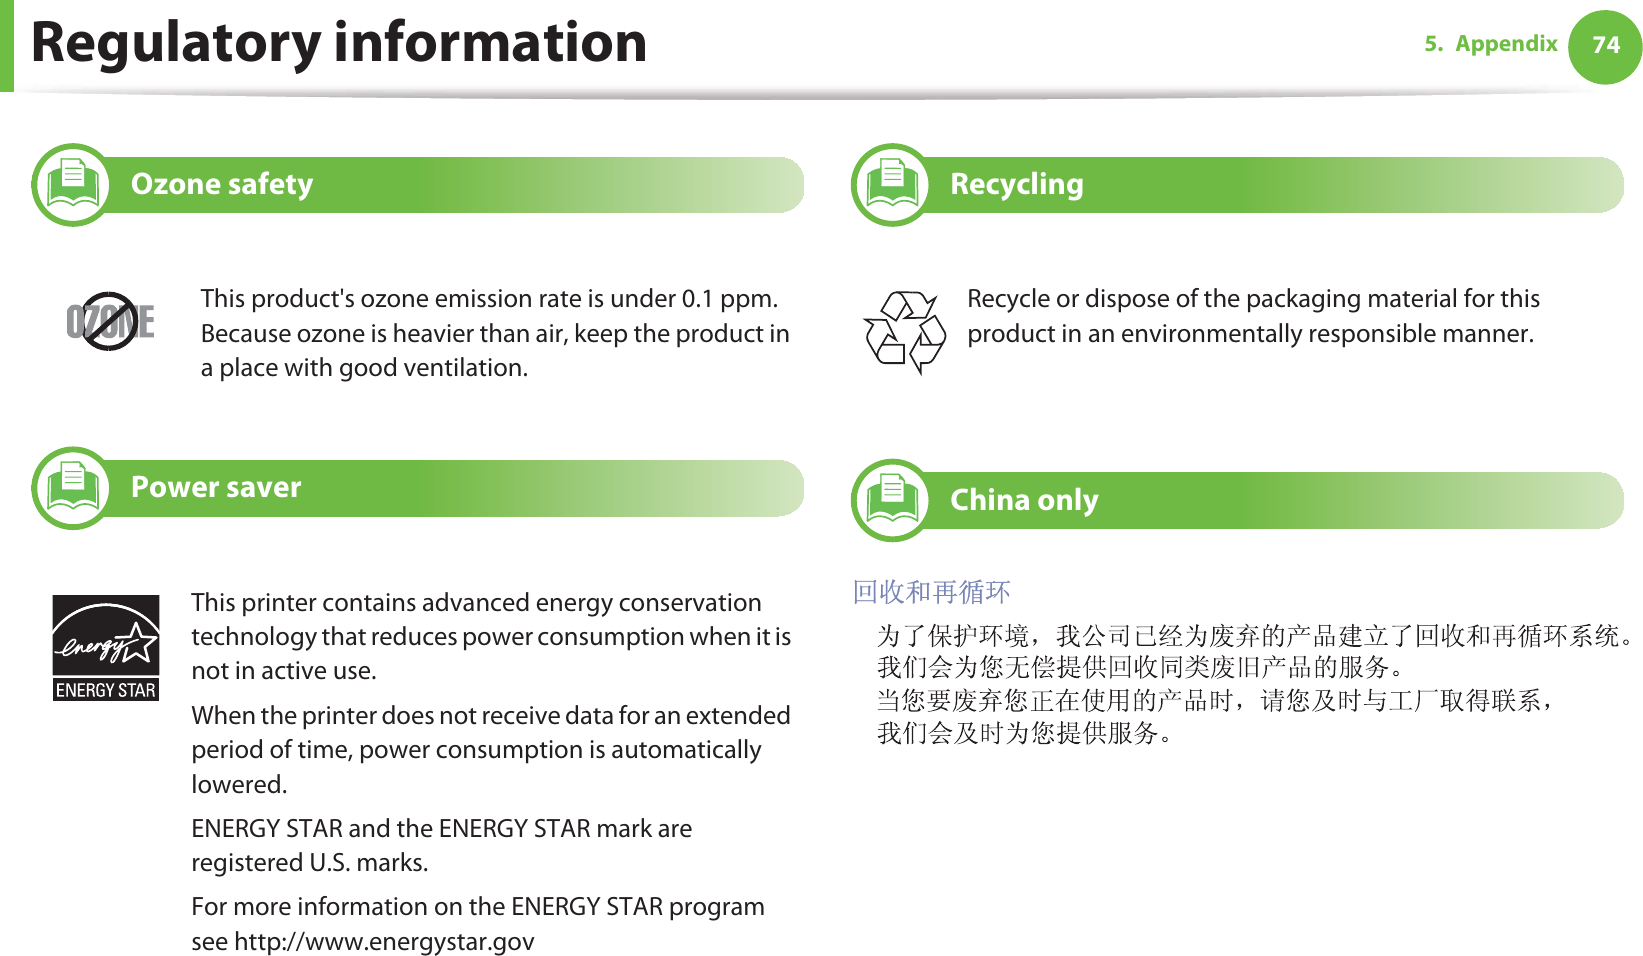 Regulatory information 745. Appendix6 Ozone safety7 Power saver8 Recycling9 China onlyThis product&apos;s ozone emission rate is under 0.1 ppm. Because ozone is heavier than air, keep the product in a place with good ventilation.This printer contains advanced energy conservation technology that reduces power consumption when it is not in active use.When the printer does not receive data for an extended period of time, power consumption is automatically lowered. ENERGY STAR and the ENERGY STAR mark are registered U.S. marks. For more information on the ENERGY STAR program see http://www.energystar.govRecycle or dispose of the packaging material for this product in an environmentally responsible manner.